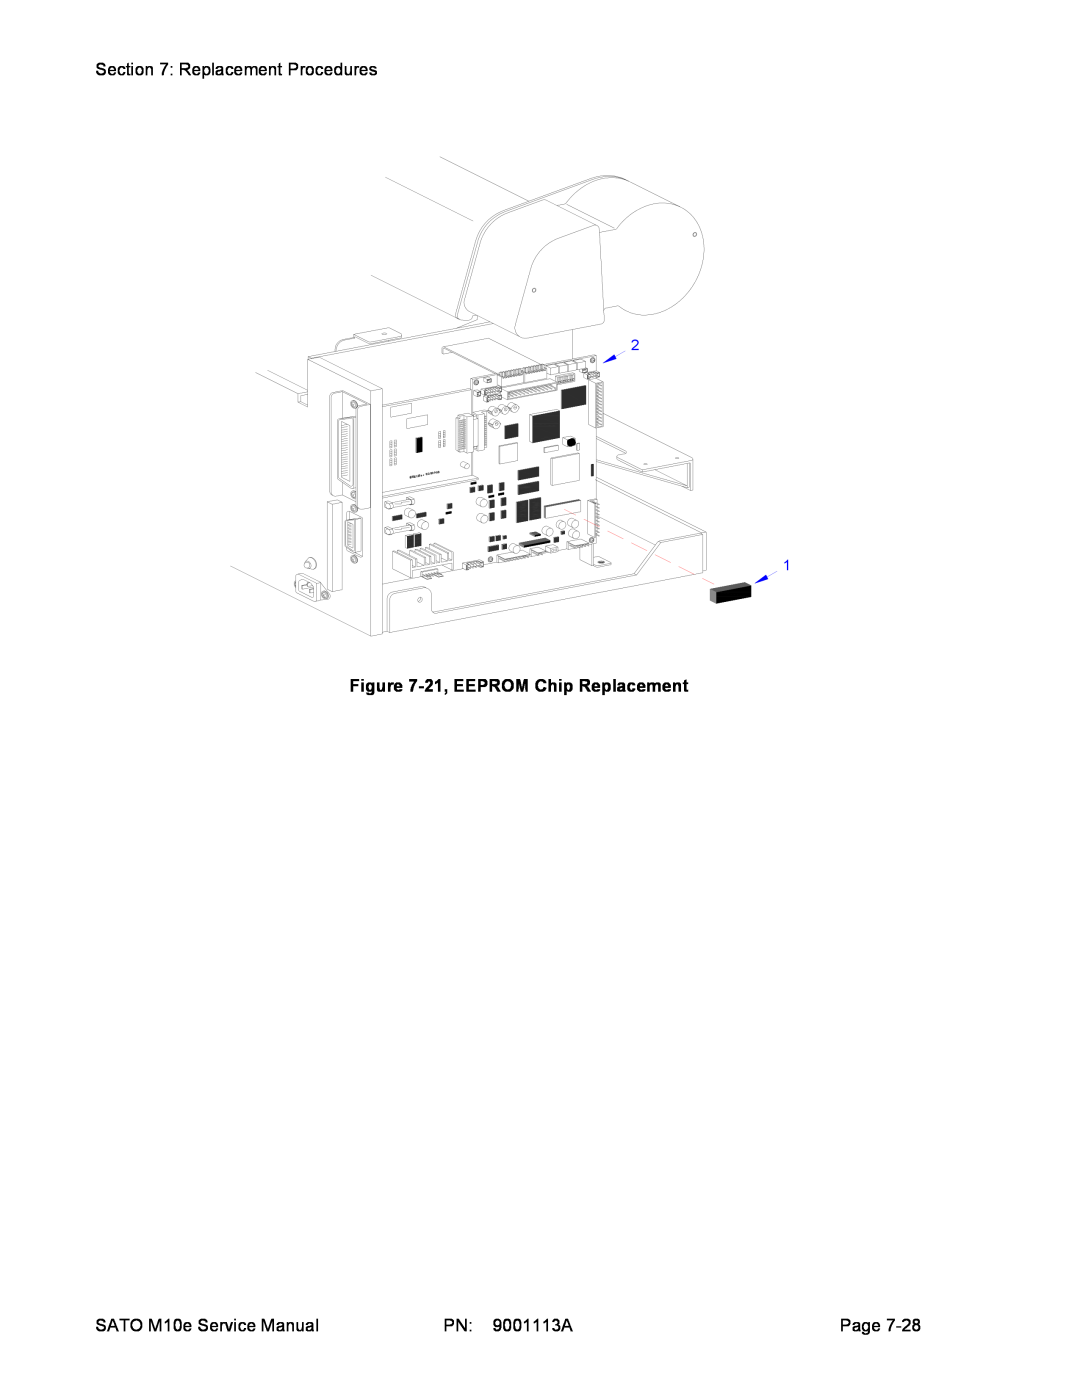 SATO service manual Replacement Procedures, 21, EEPROM Chip Replacement, SATO M10e Service Manual, PN 9001113A, Page 